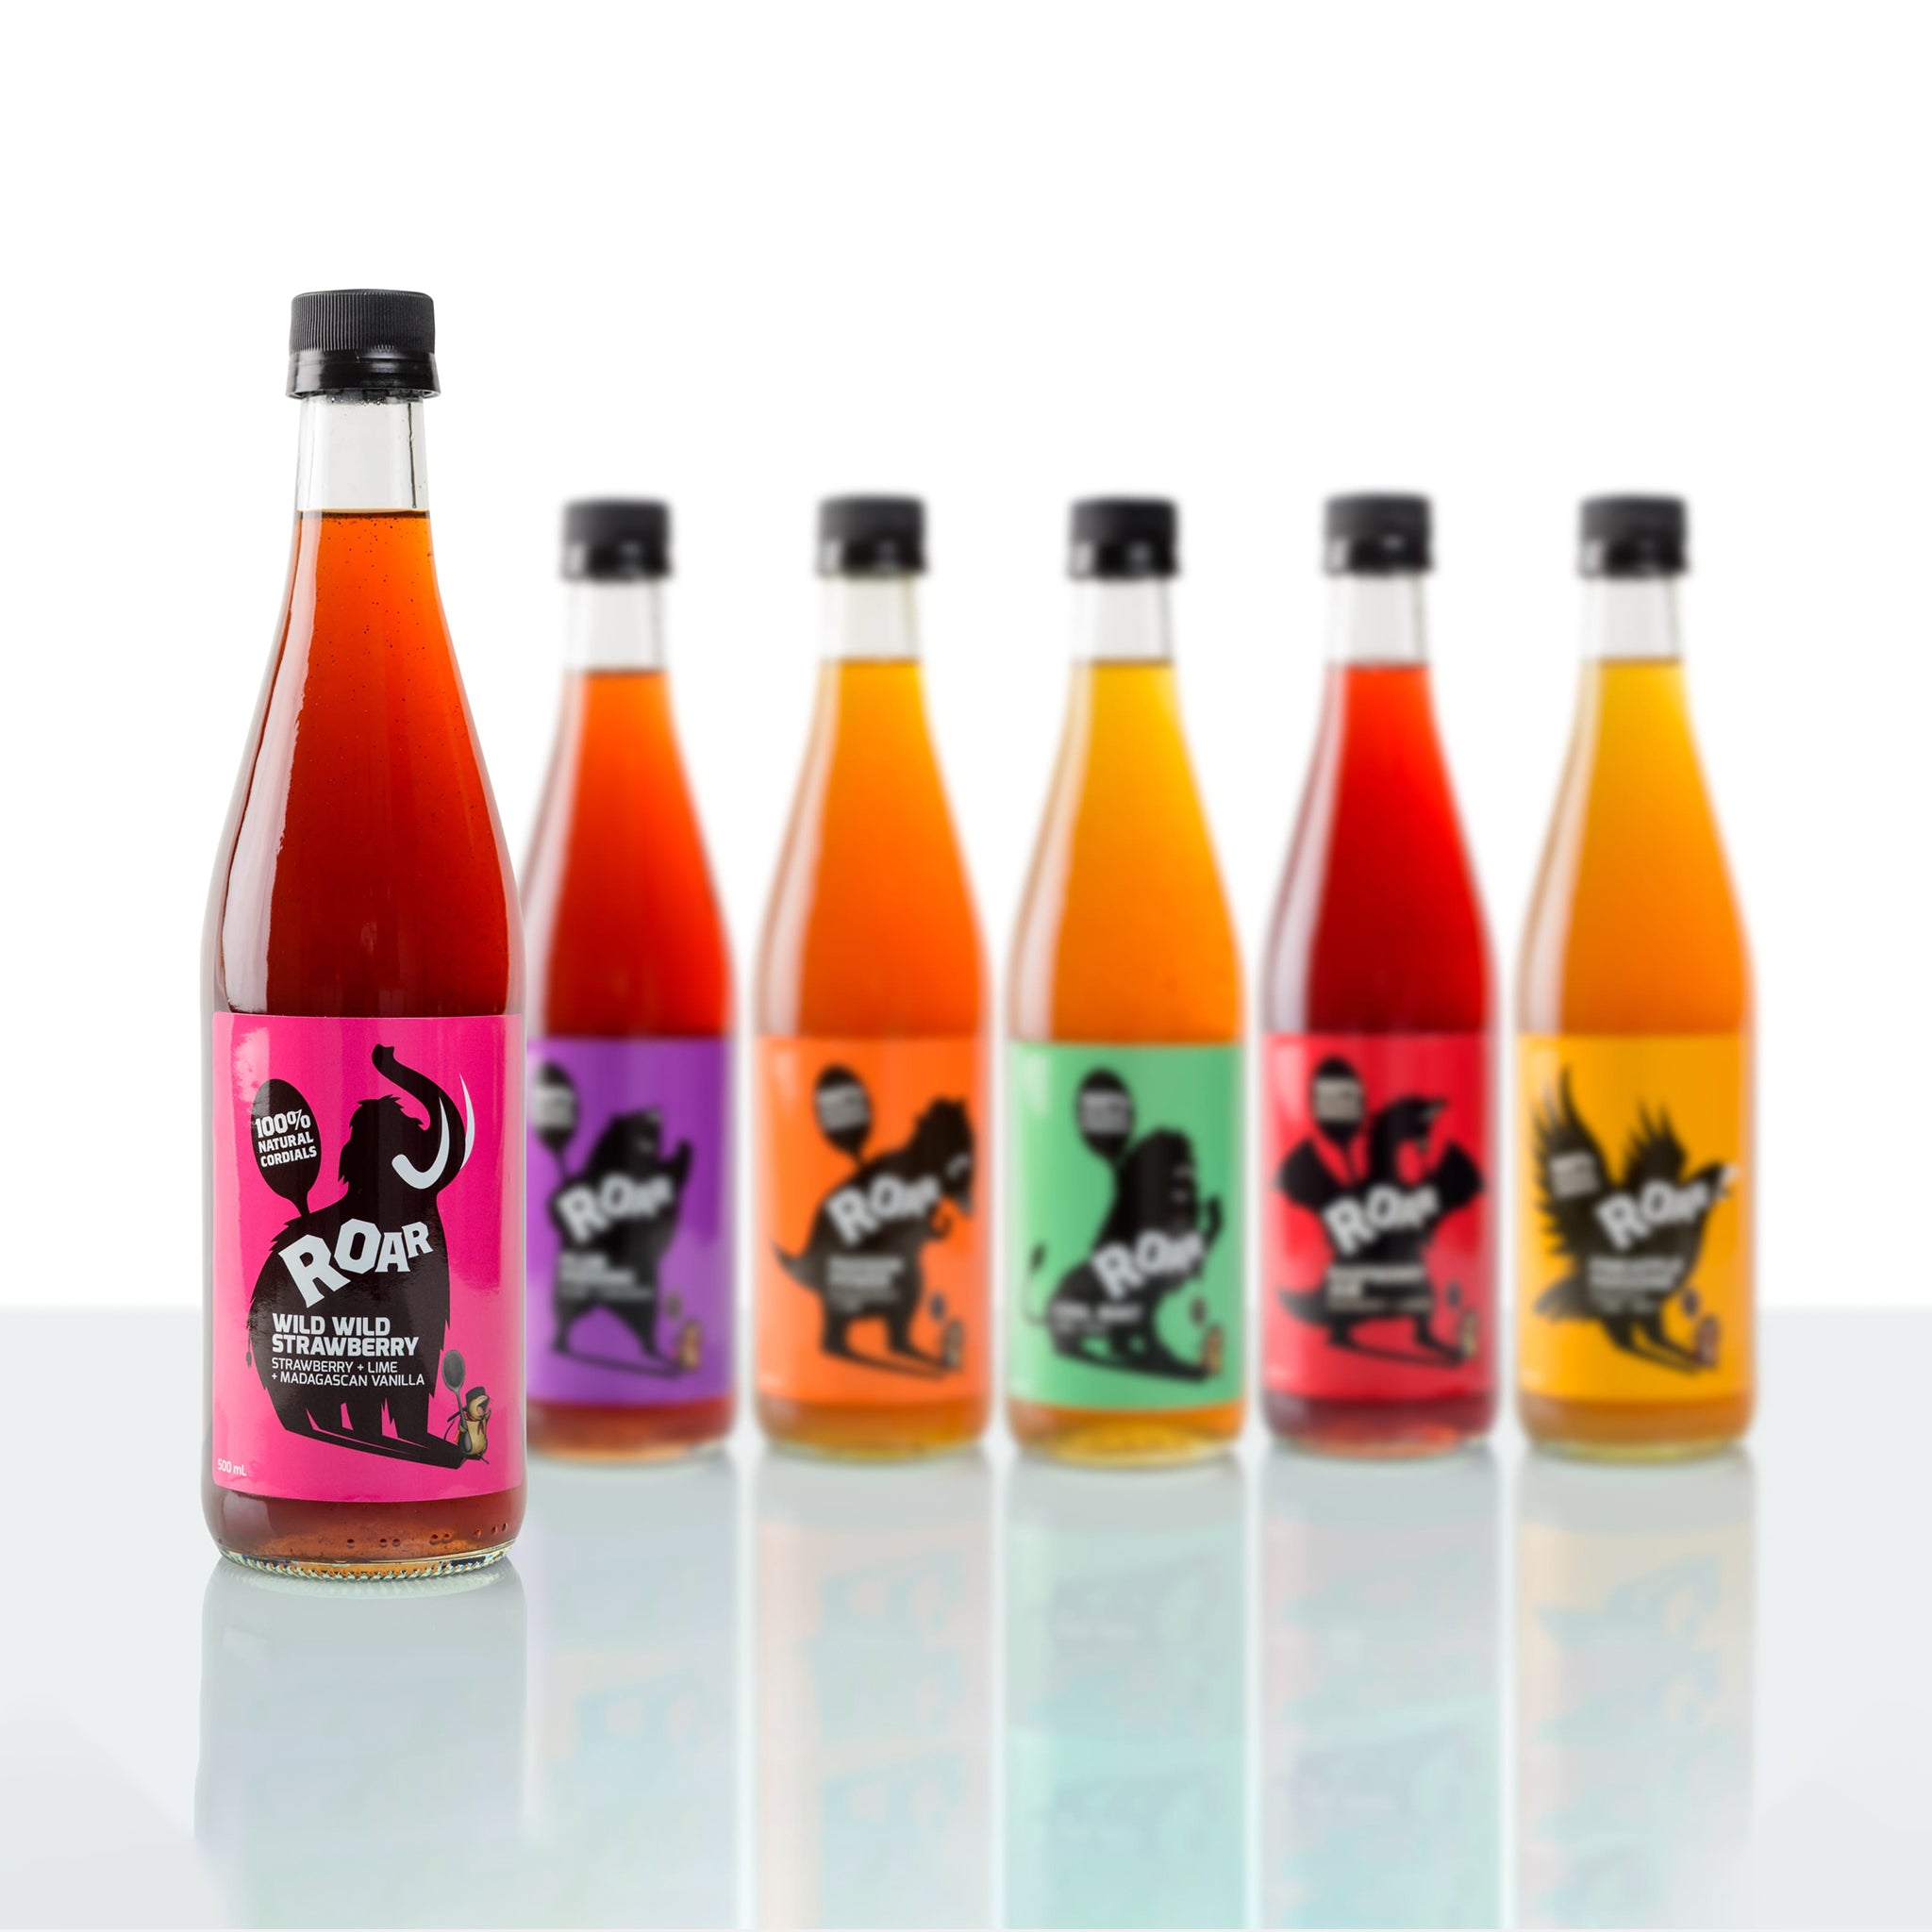 100% natural strawberry cordial highlighted in group shot of entire Roar Living cordial range